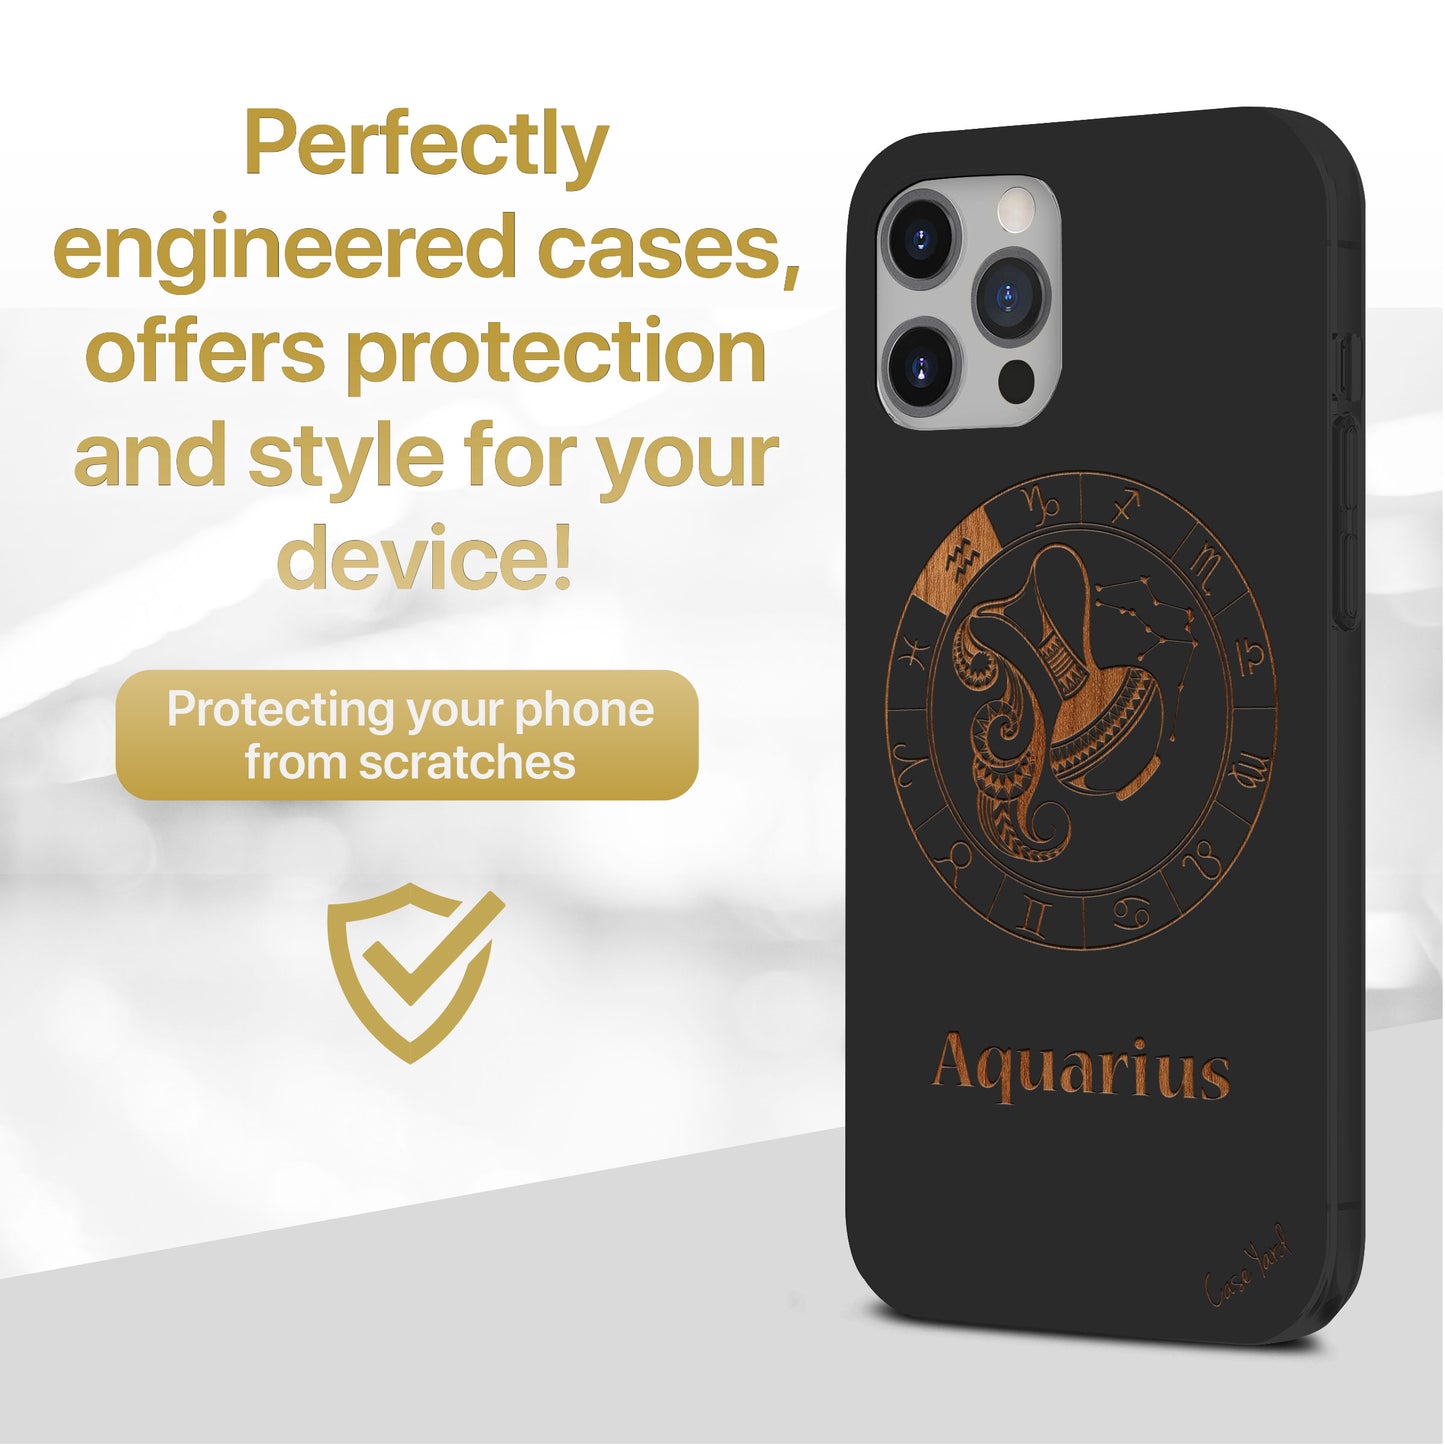 Wooden Cell Phone Case Cover, Laser Engraved case for iPhone & Samsung phone Aquarius Sign Design